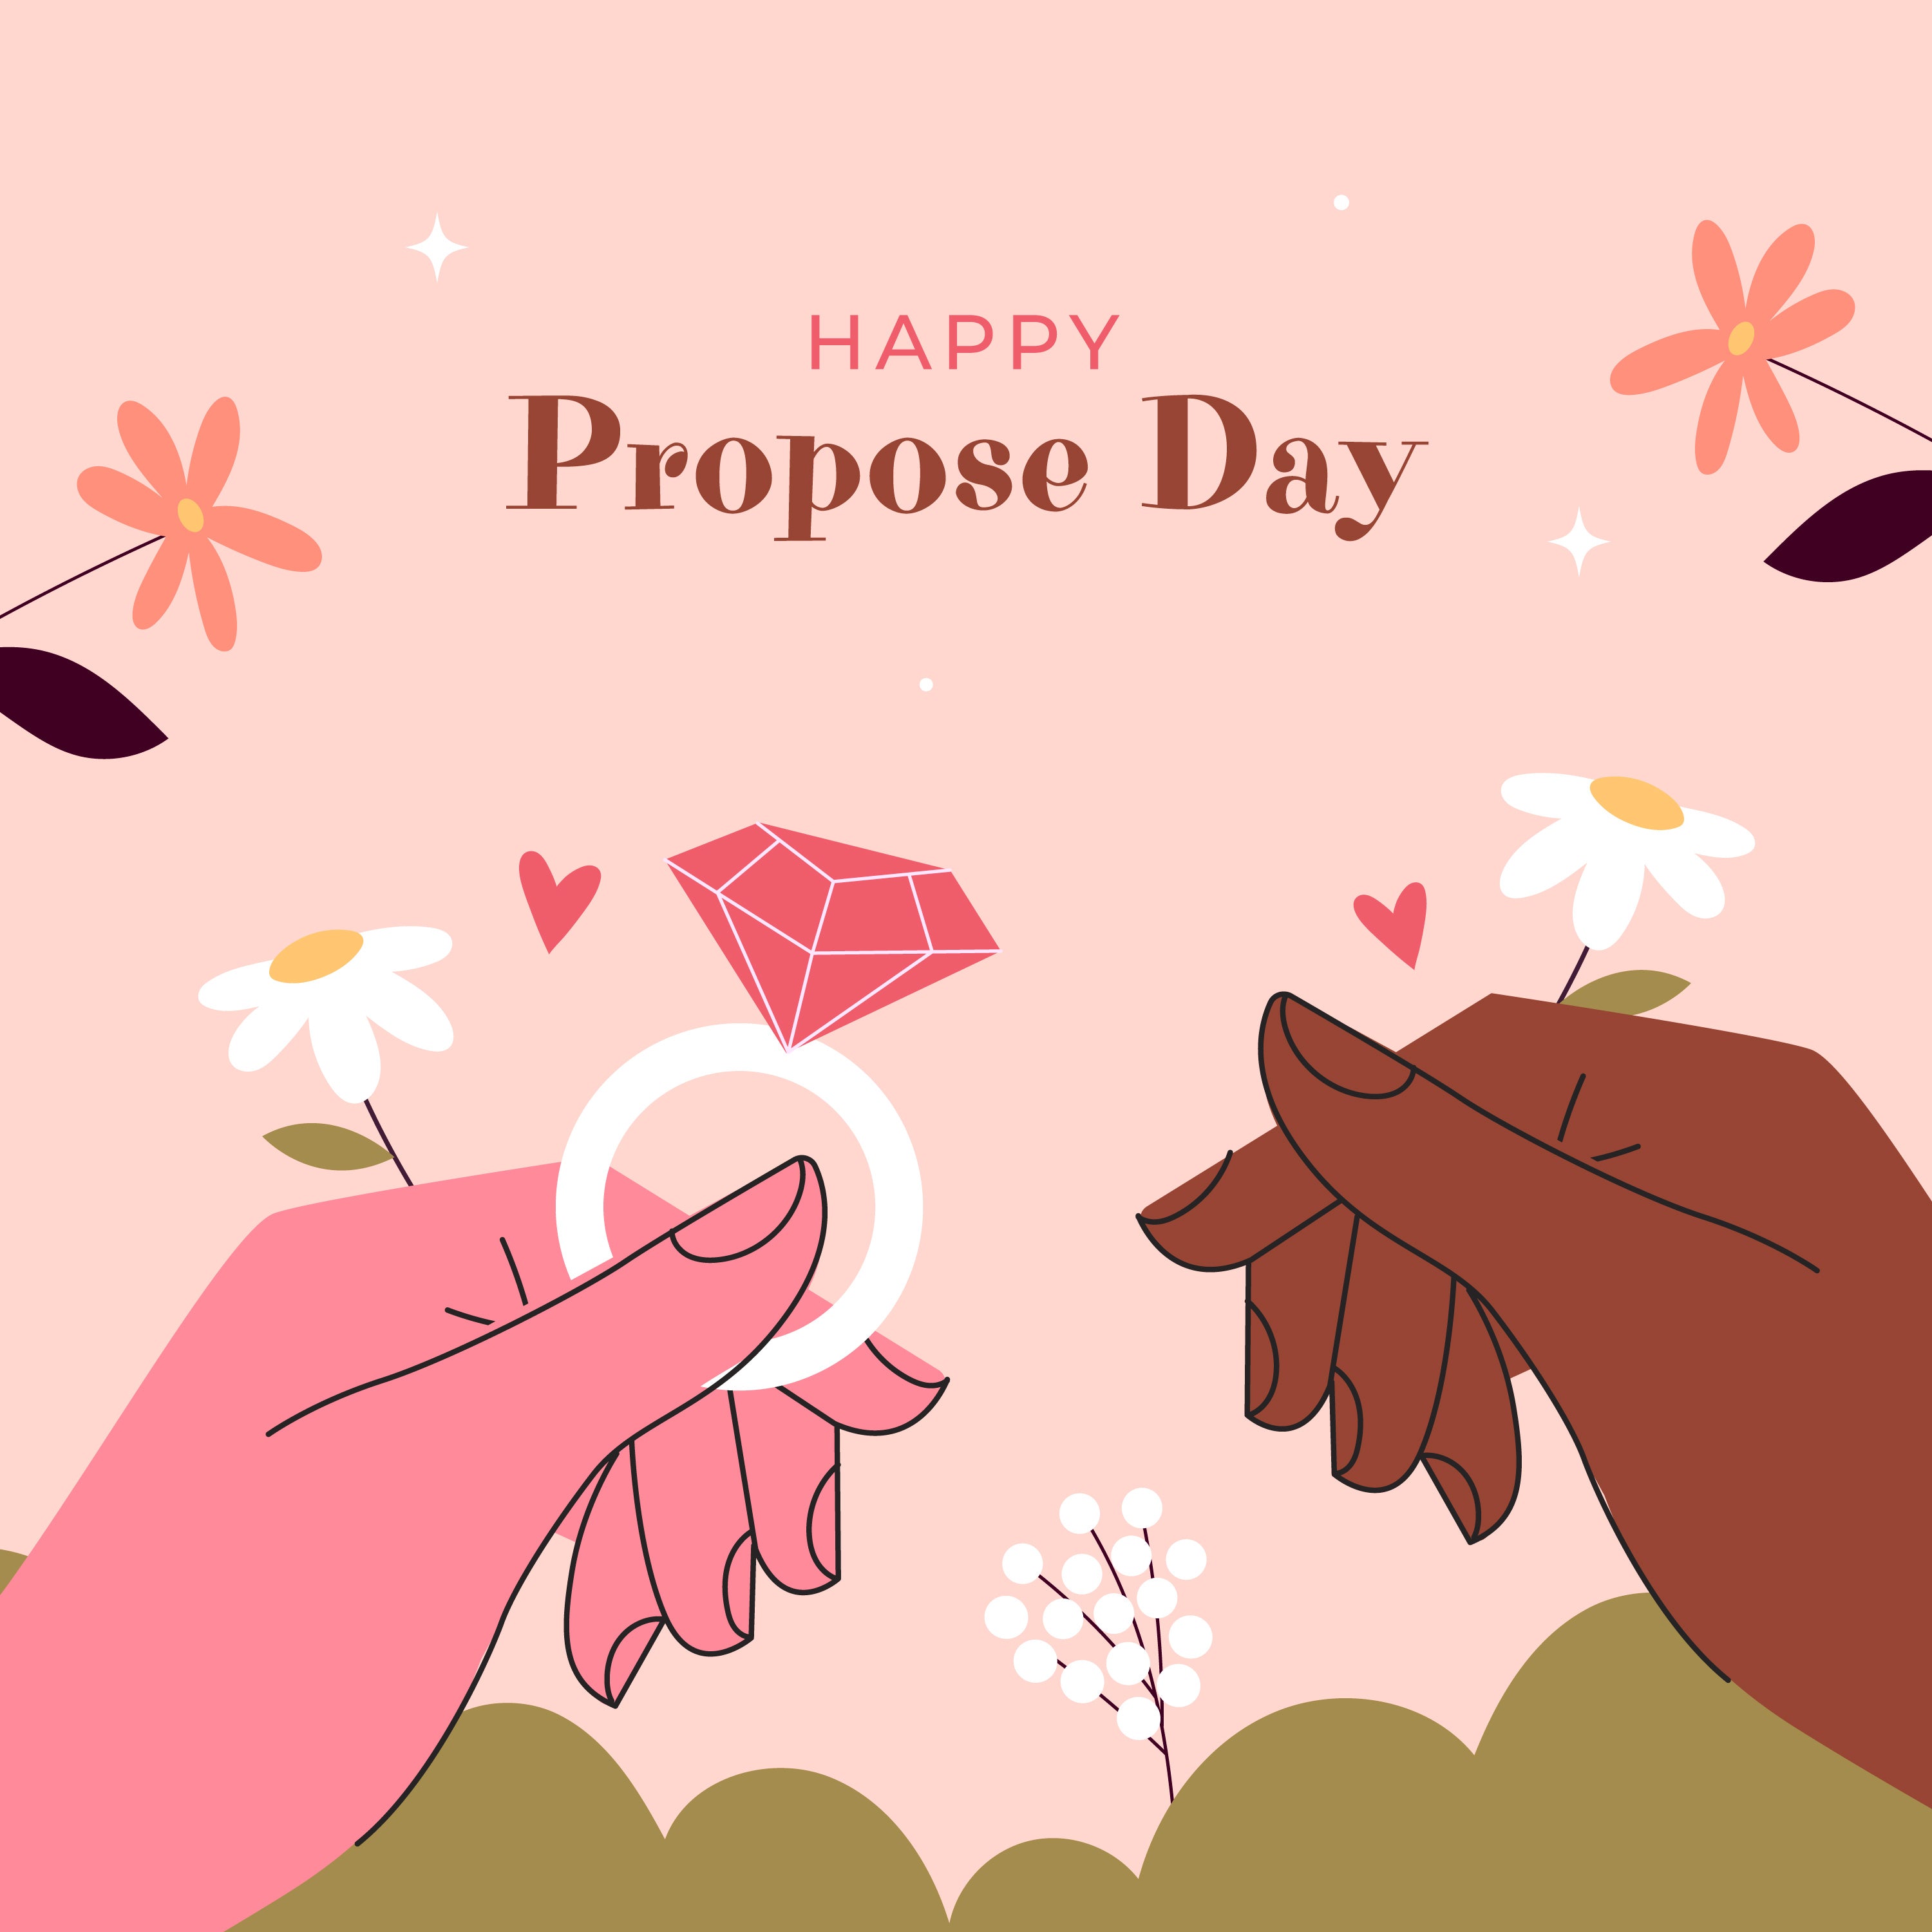 99 Proposal Ideas To WOW Your Soulmate